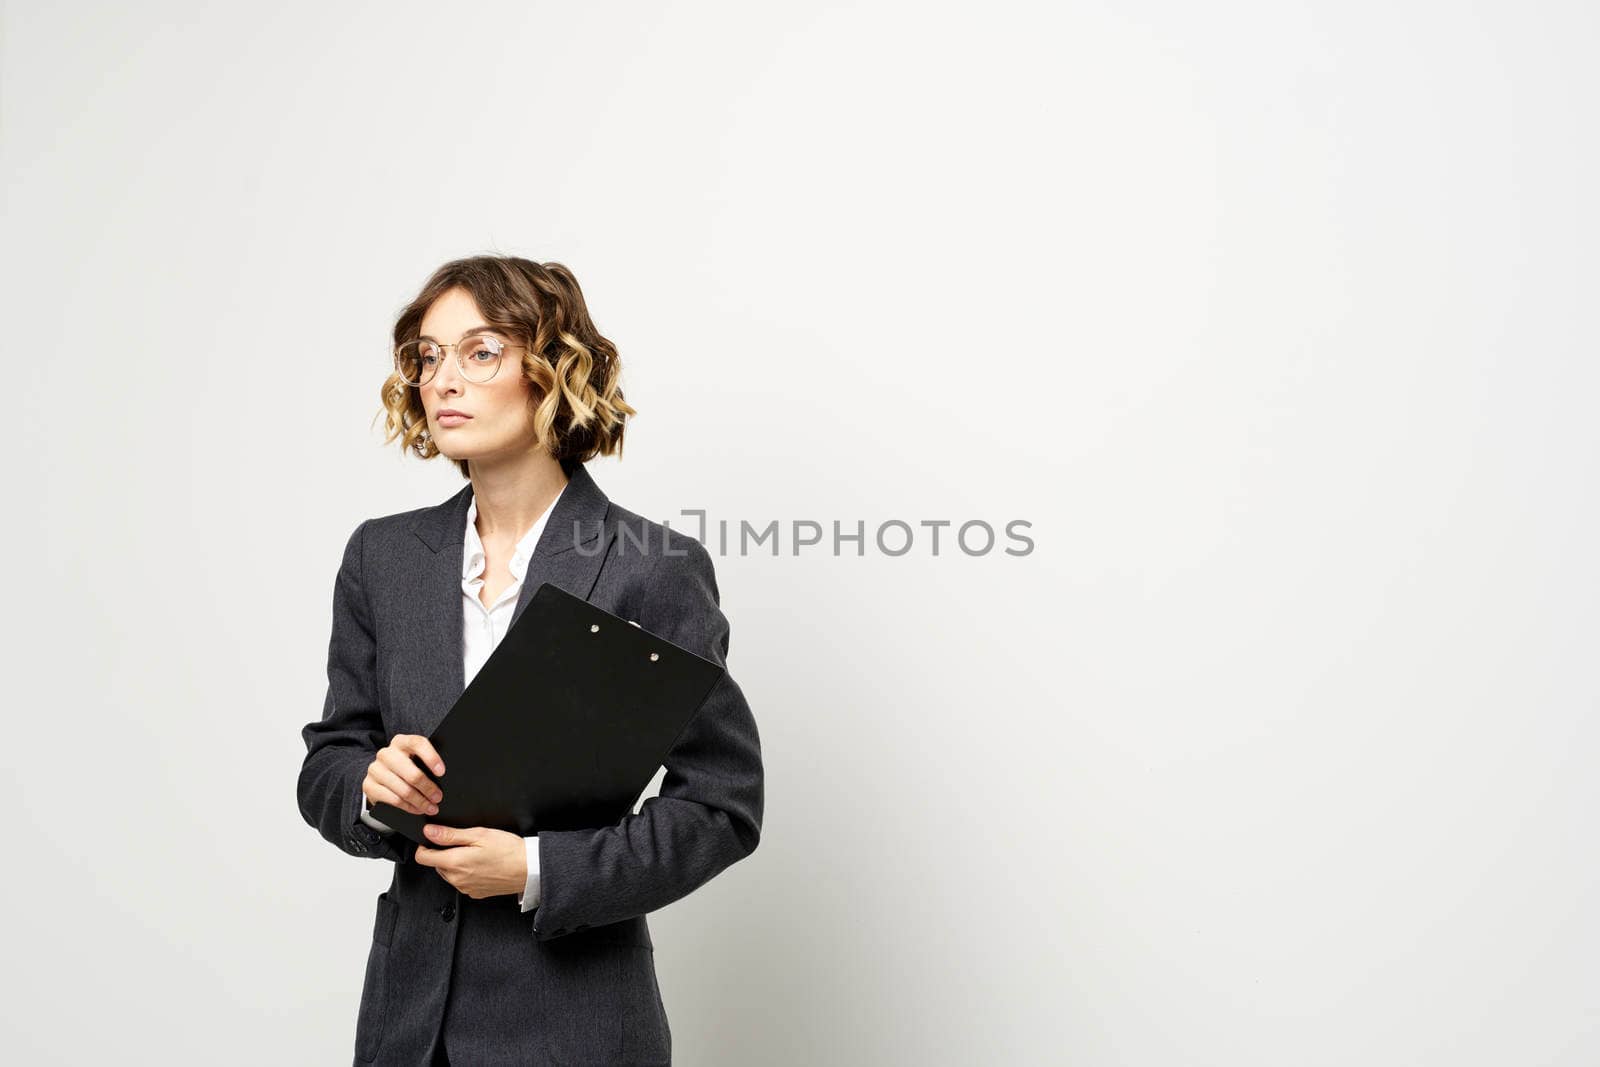 business woman in a suit with documents in hands light background curly hair hairstyle. High quality photo